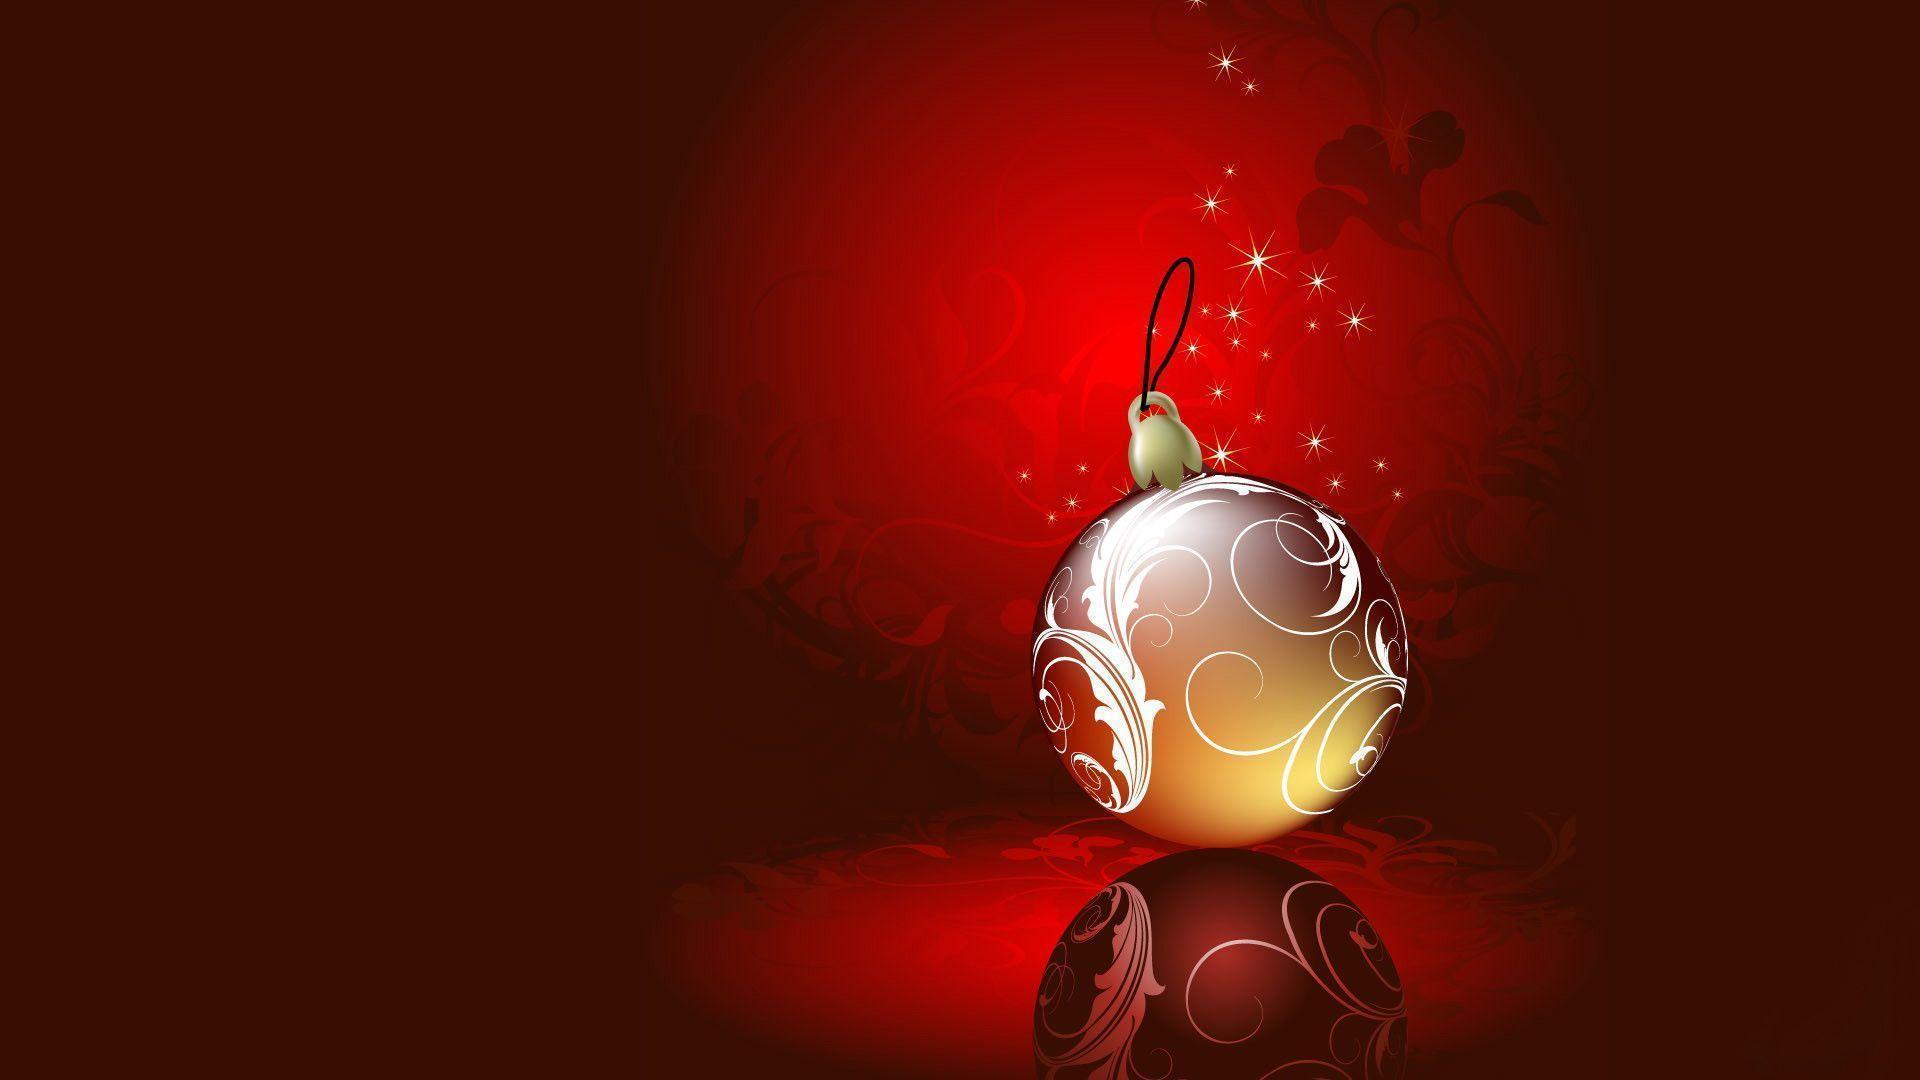 New Year Windows 7 background HD Wallpaper. High Quality